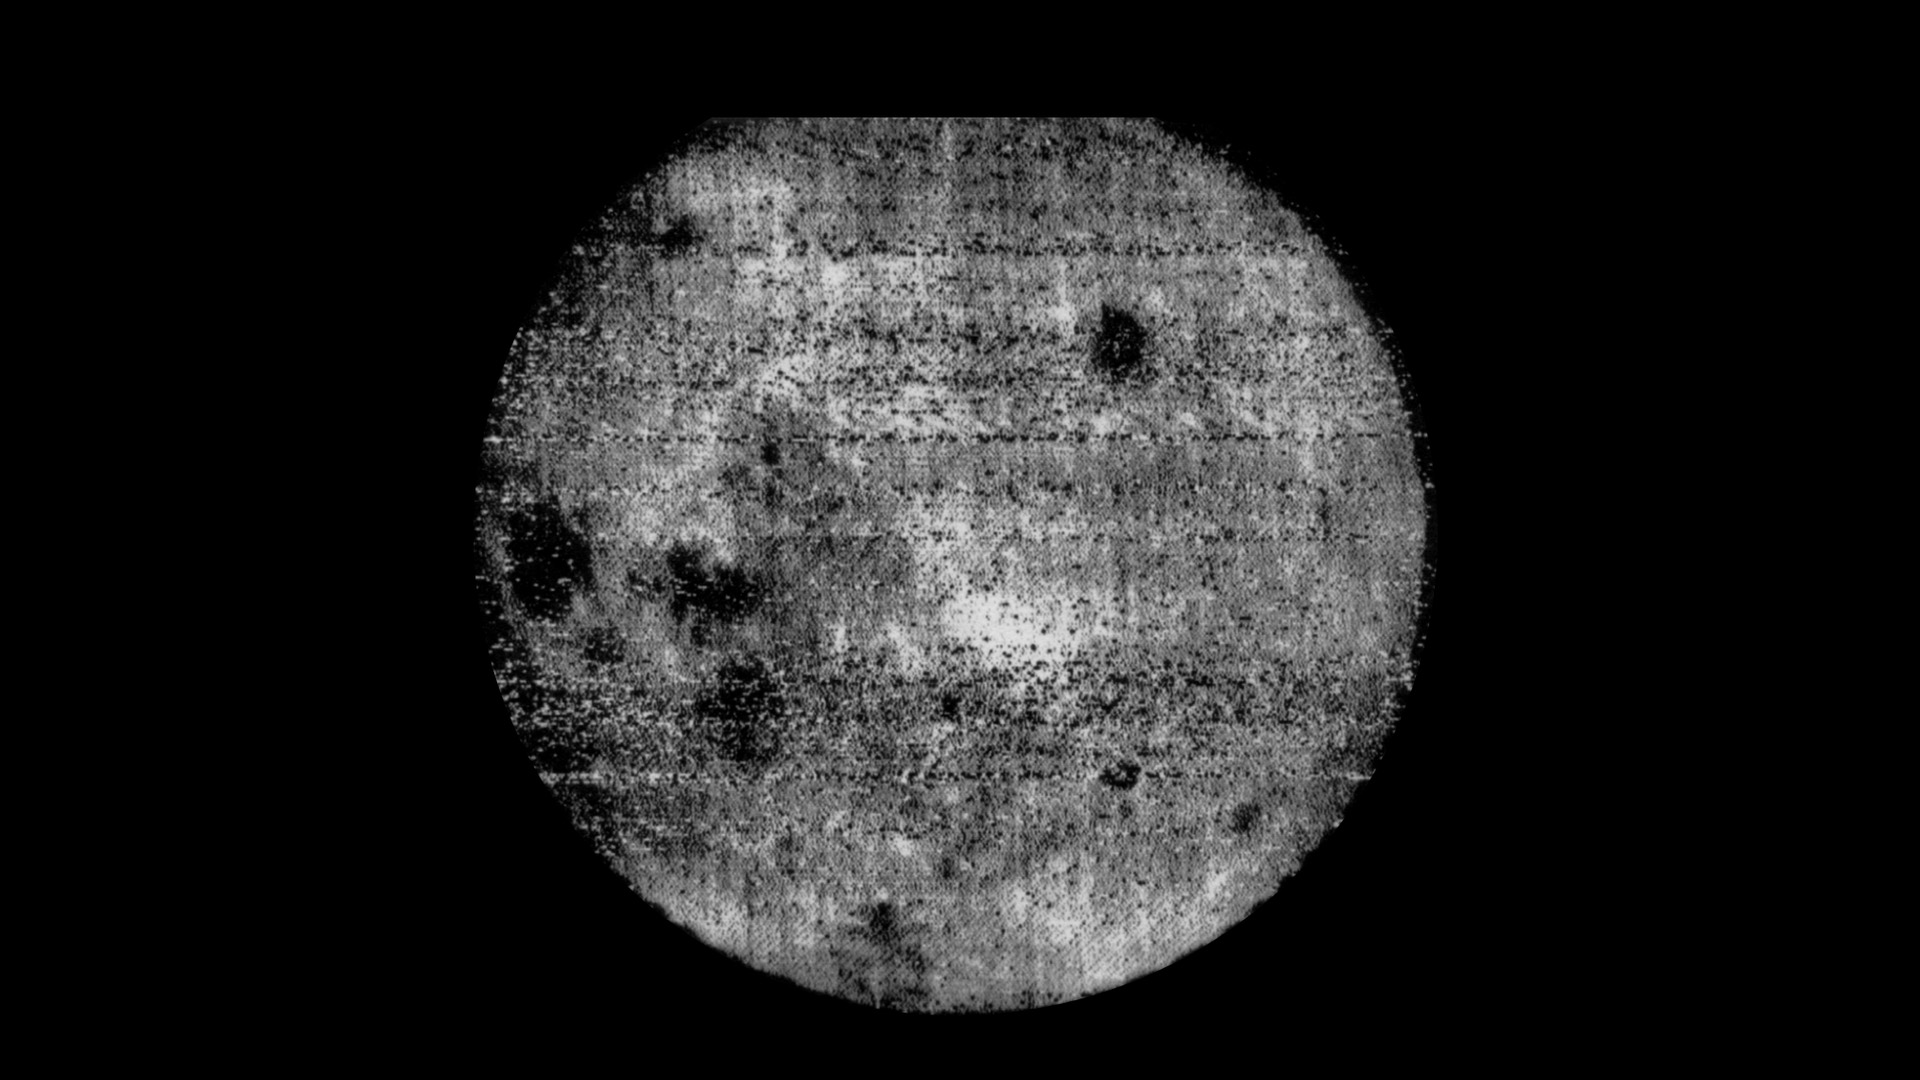 Fuzzy black and white image of the Moon.